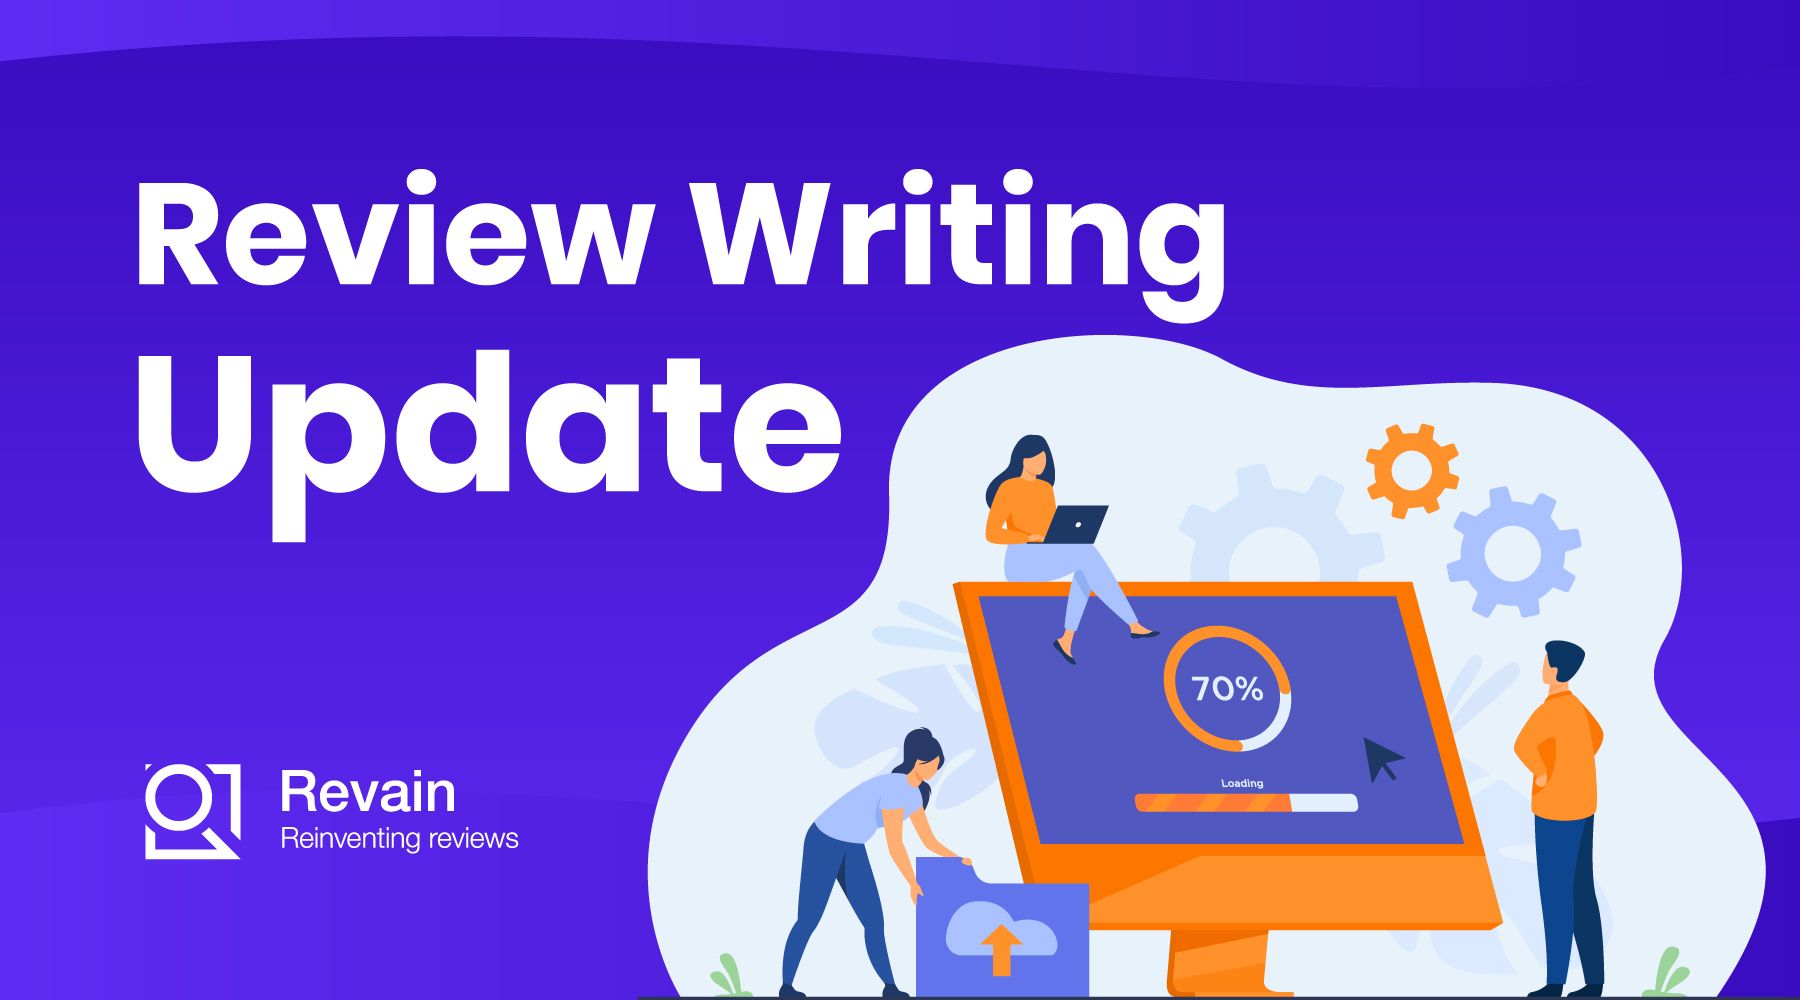 New Review Writing Page